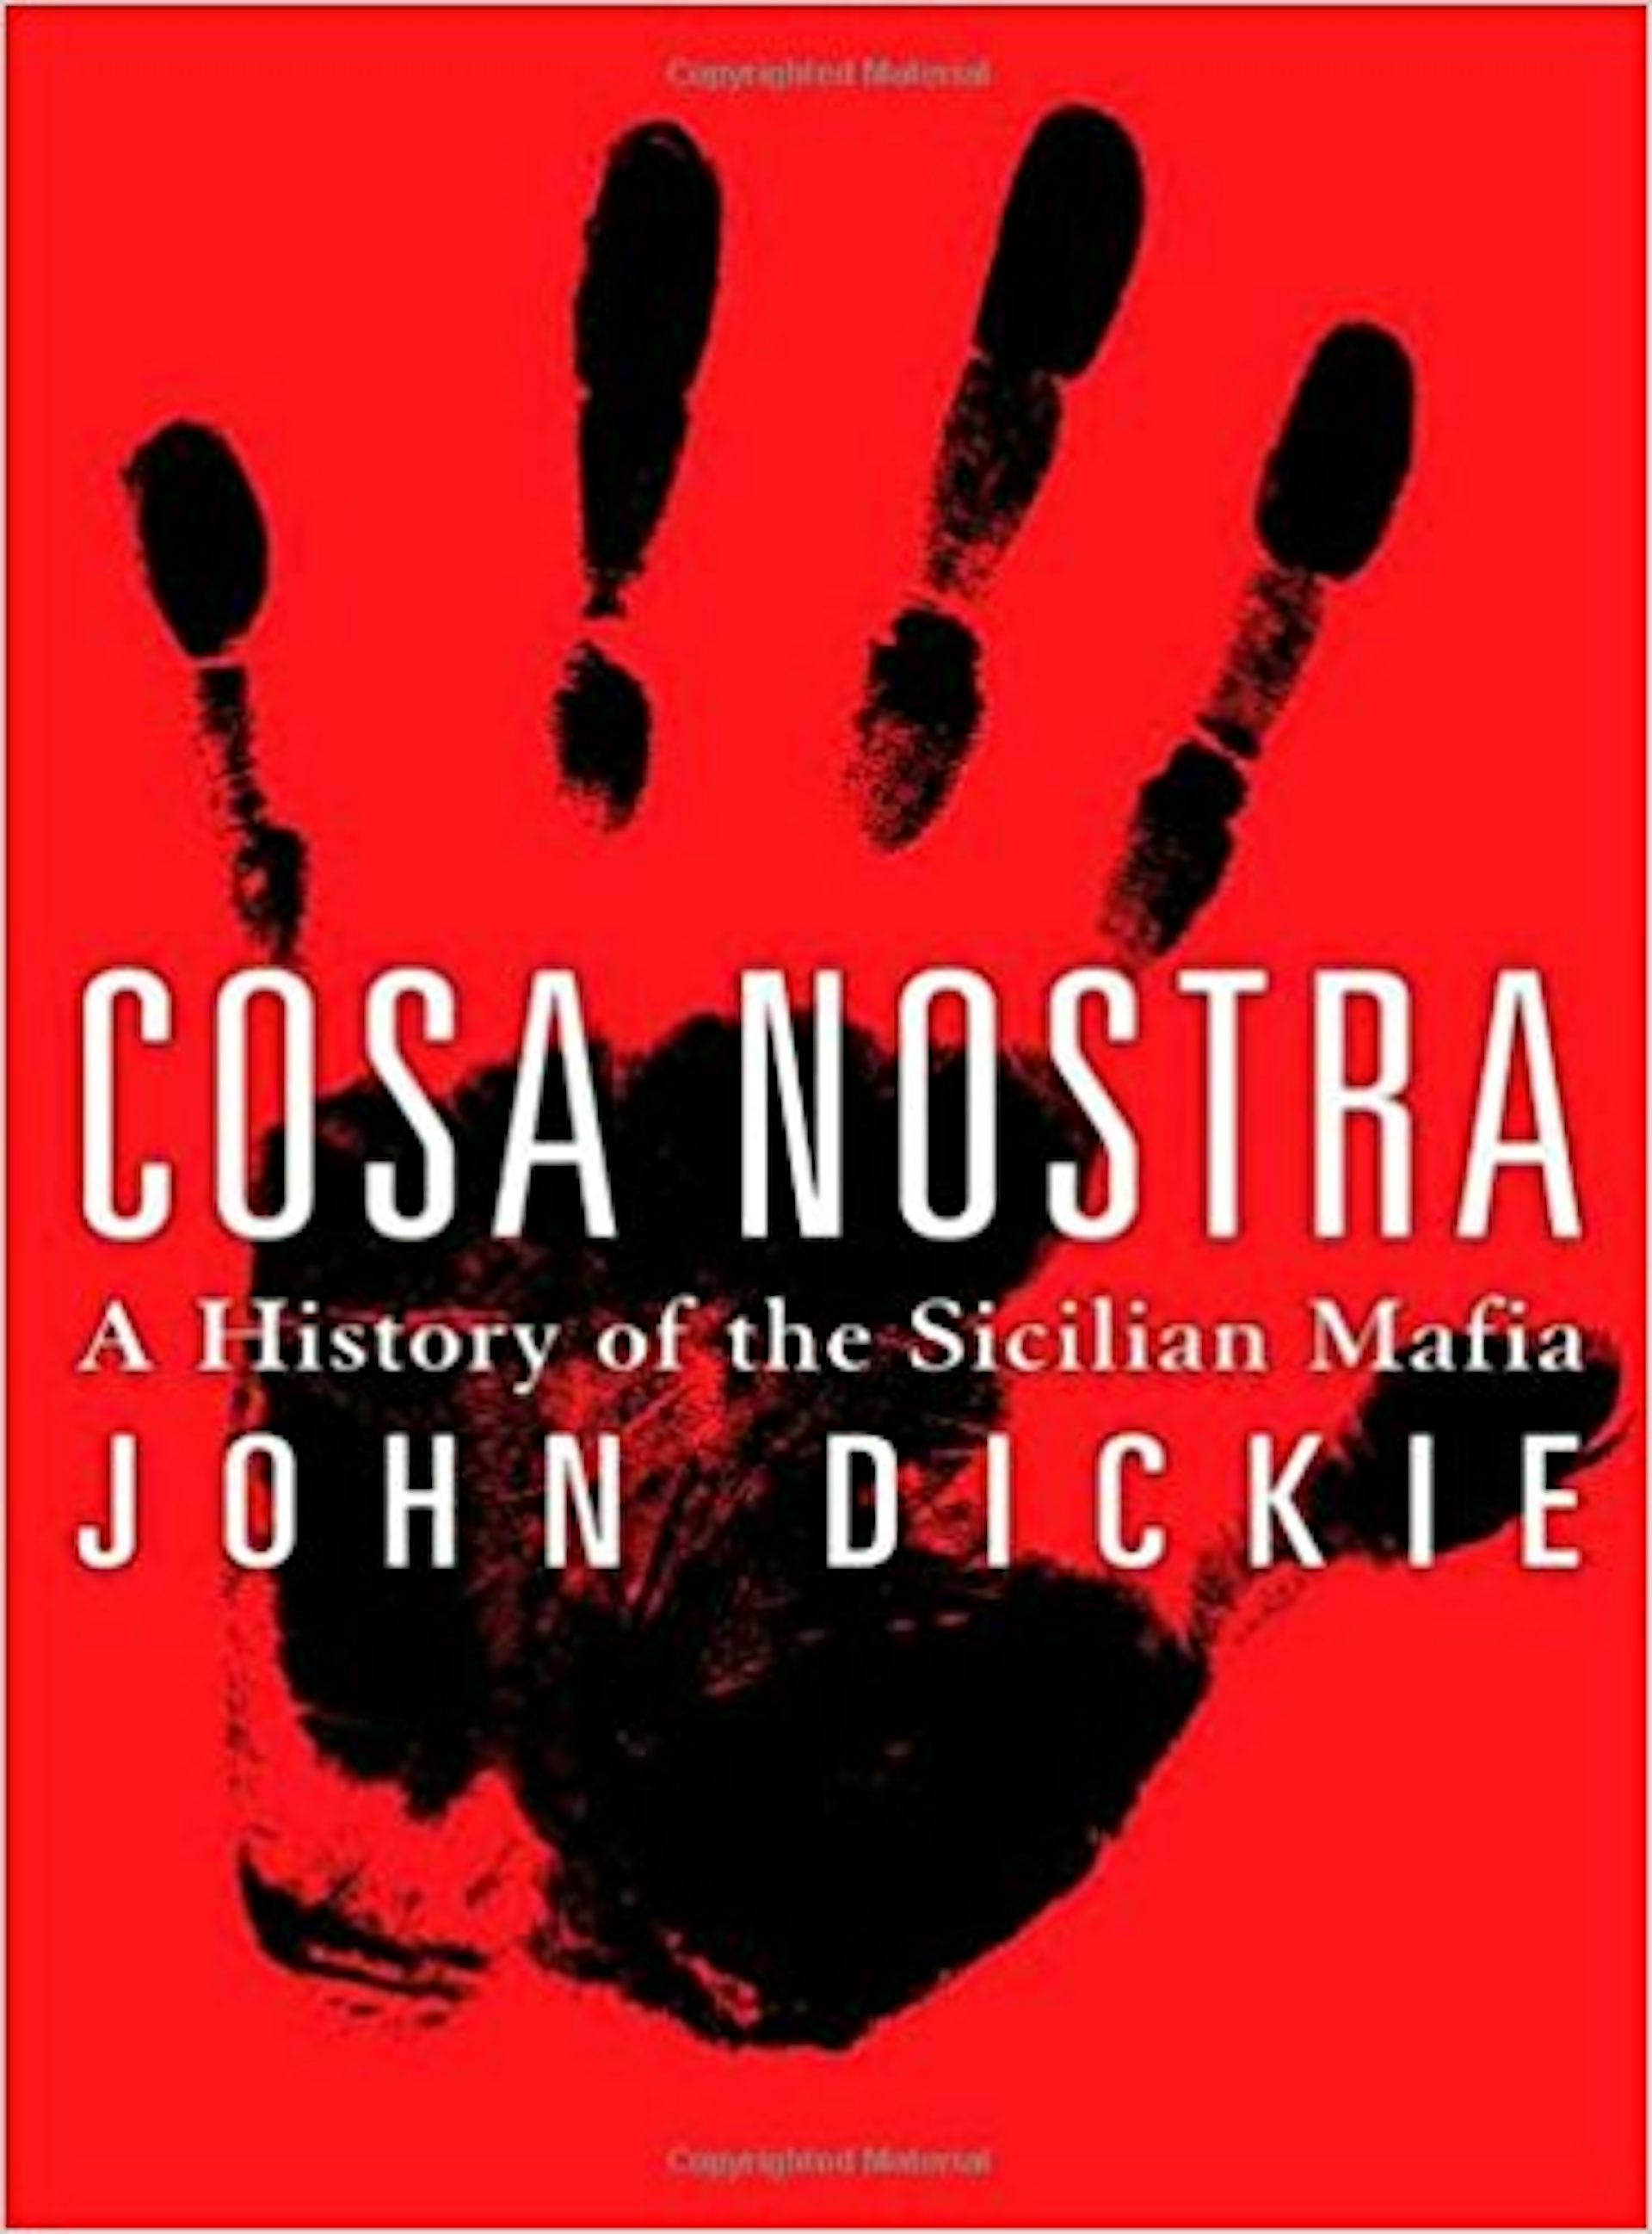 cosa nostra meaning in english